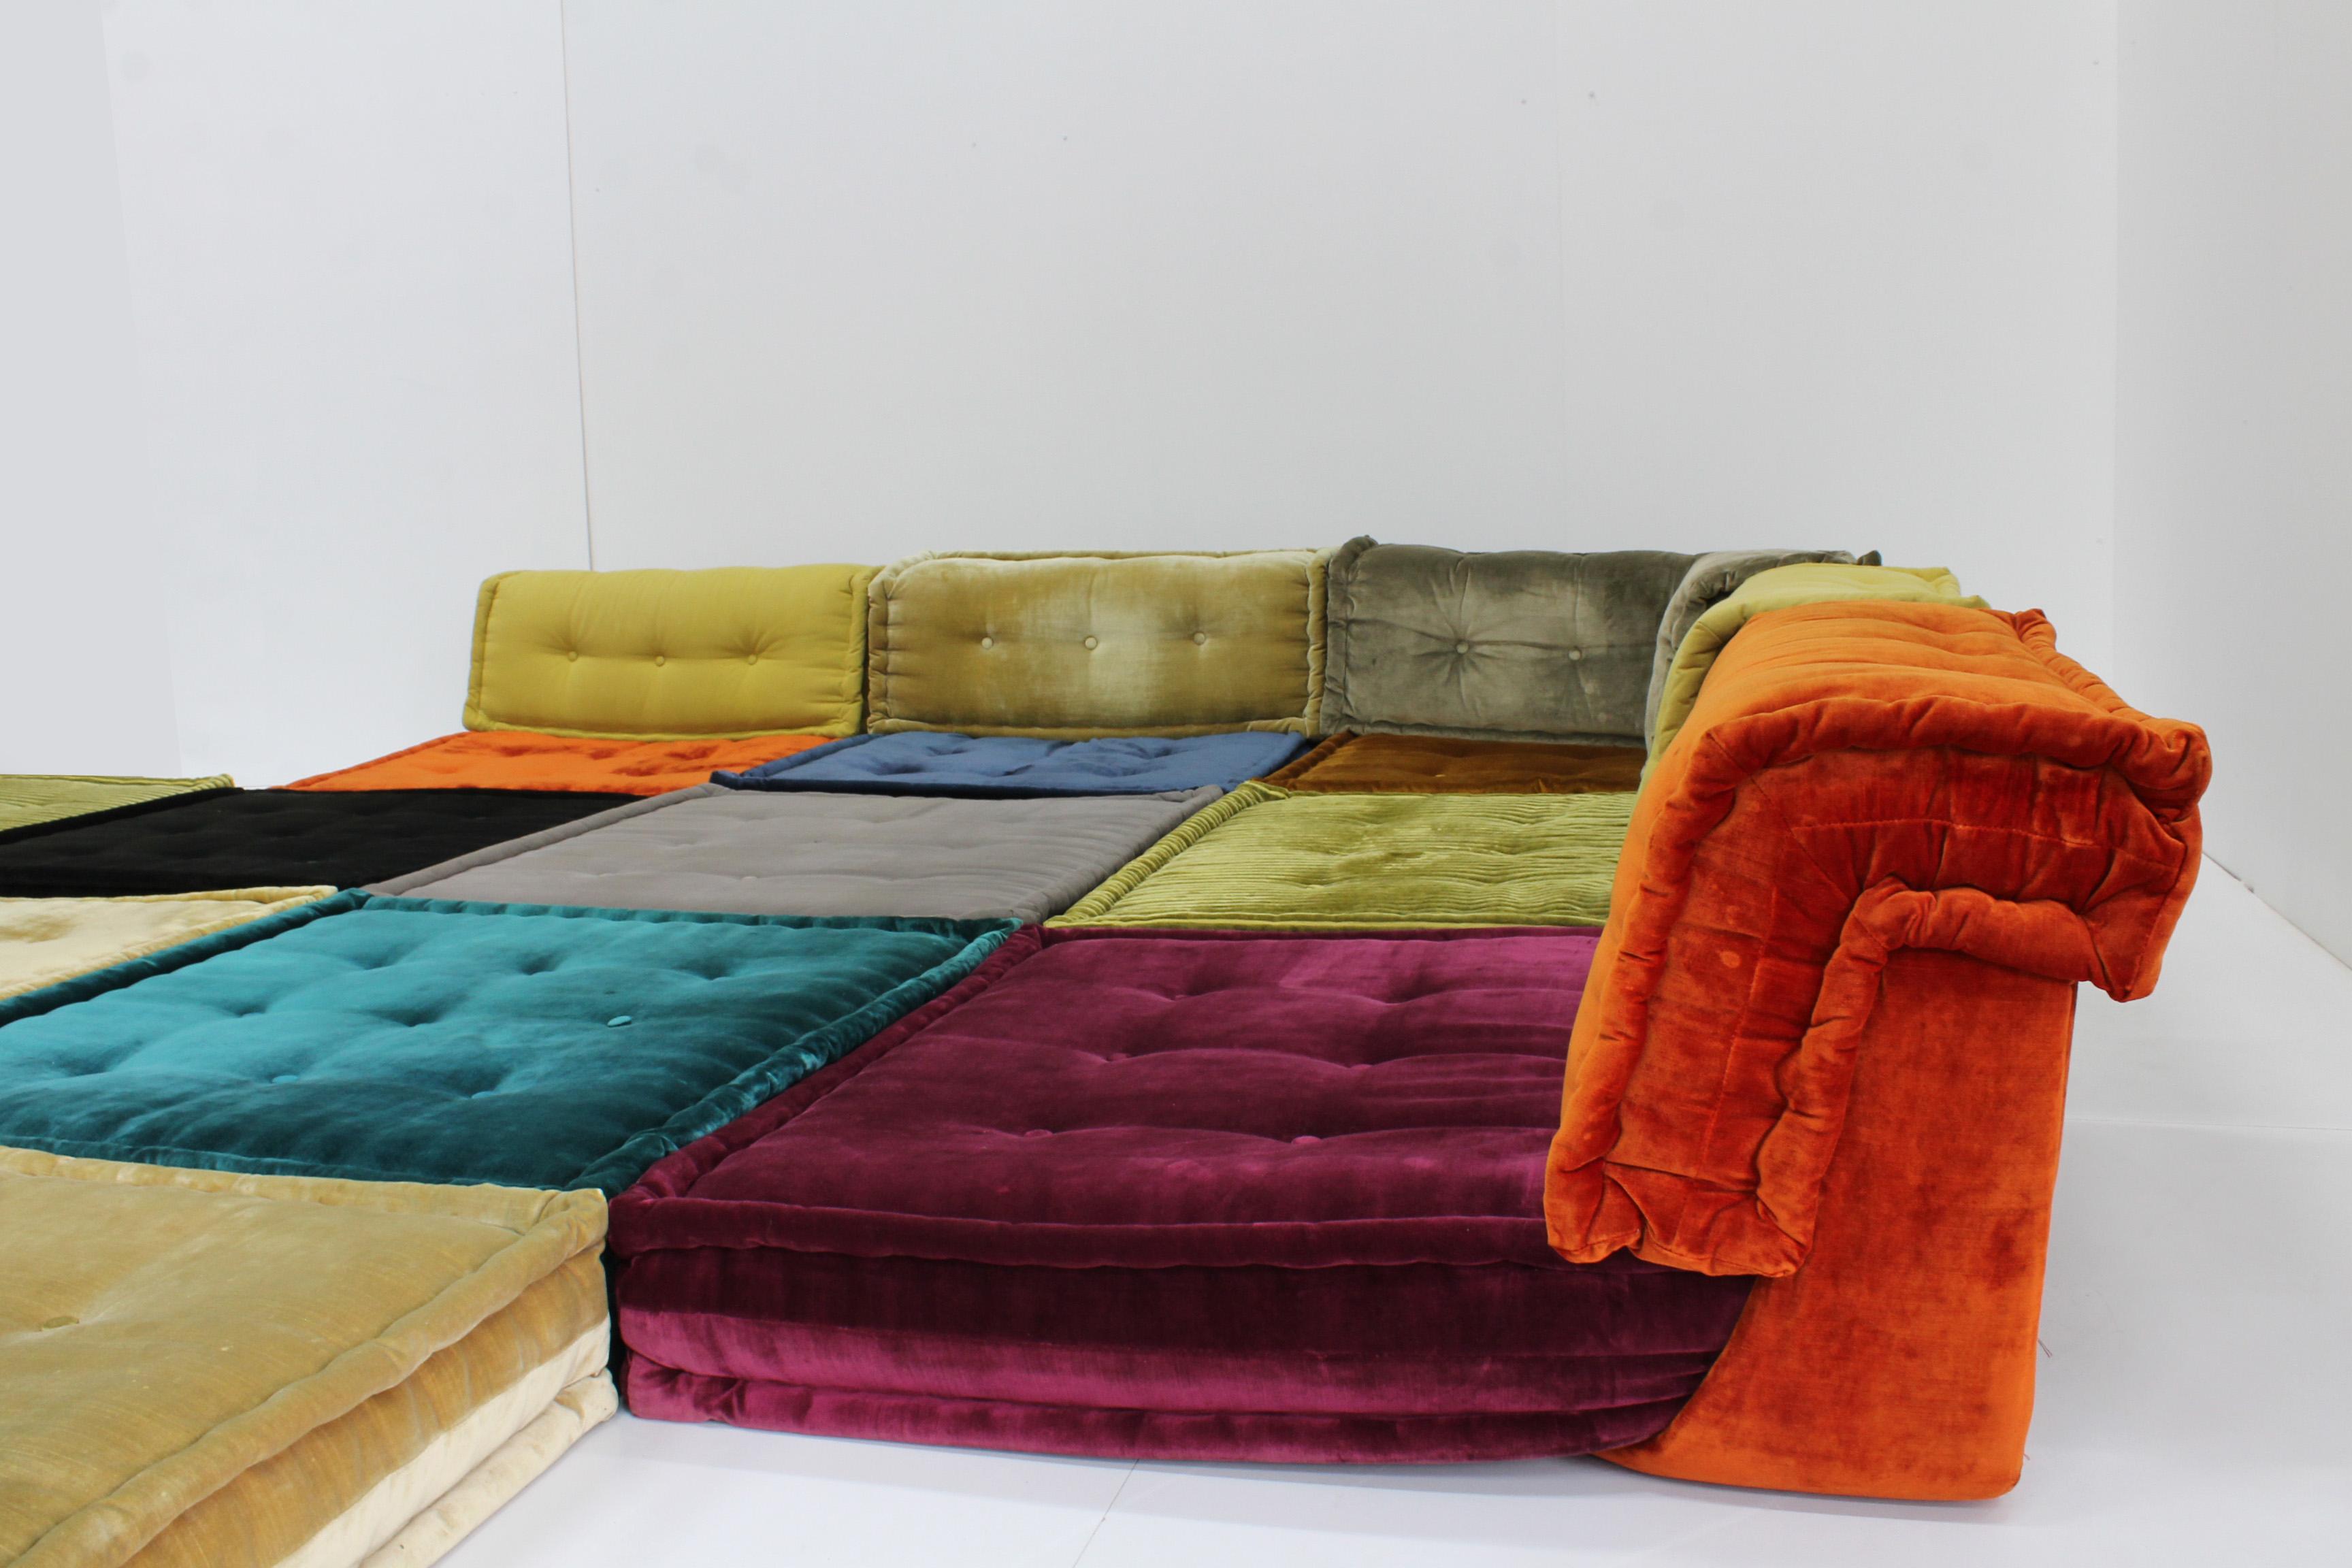 Roche Bobois Mah jong sofa consiting of 18 pieces designed in 1971 by Hans Hopfer. A modular design sofa with unlimited options which can be altered to your living space. Beautiful vibrant fabrics , textures and colours all made in Italy. Most of